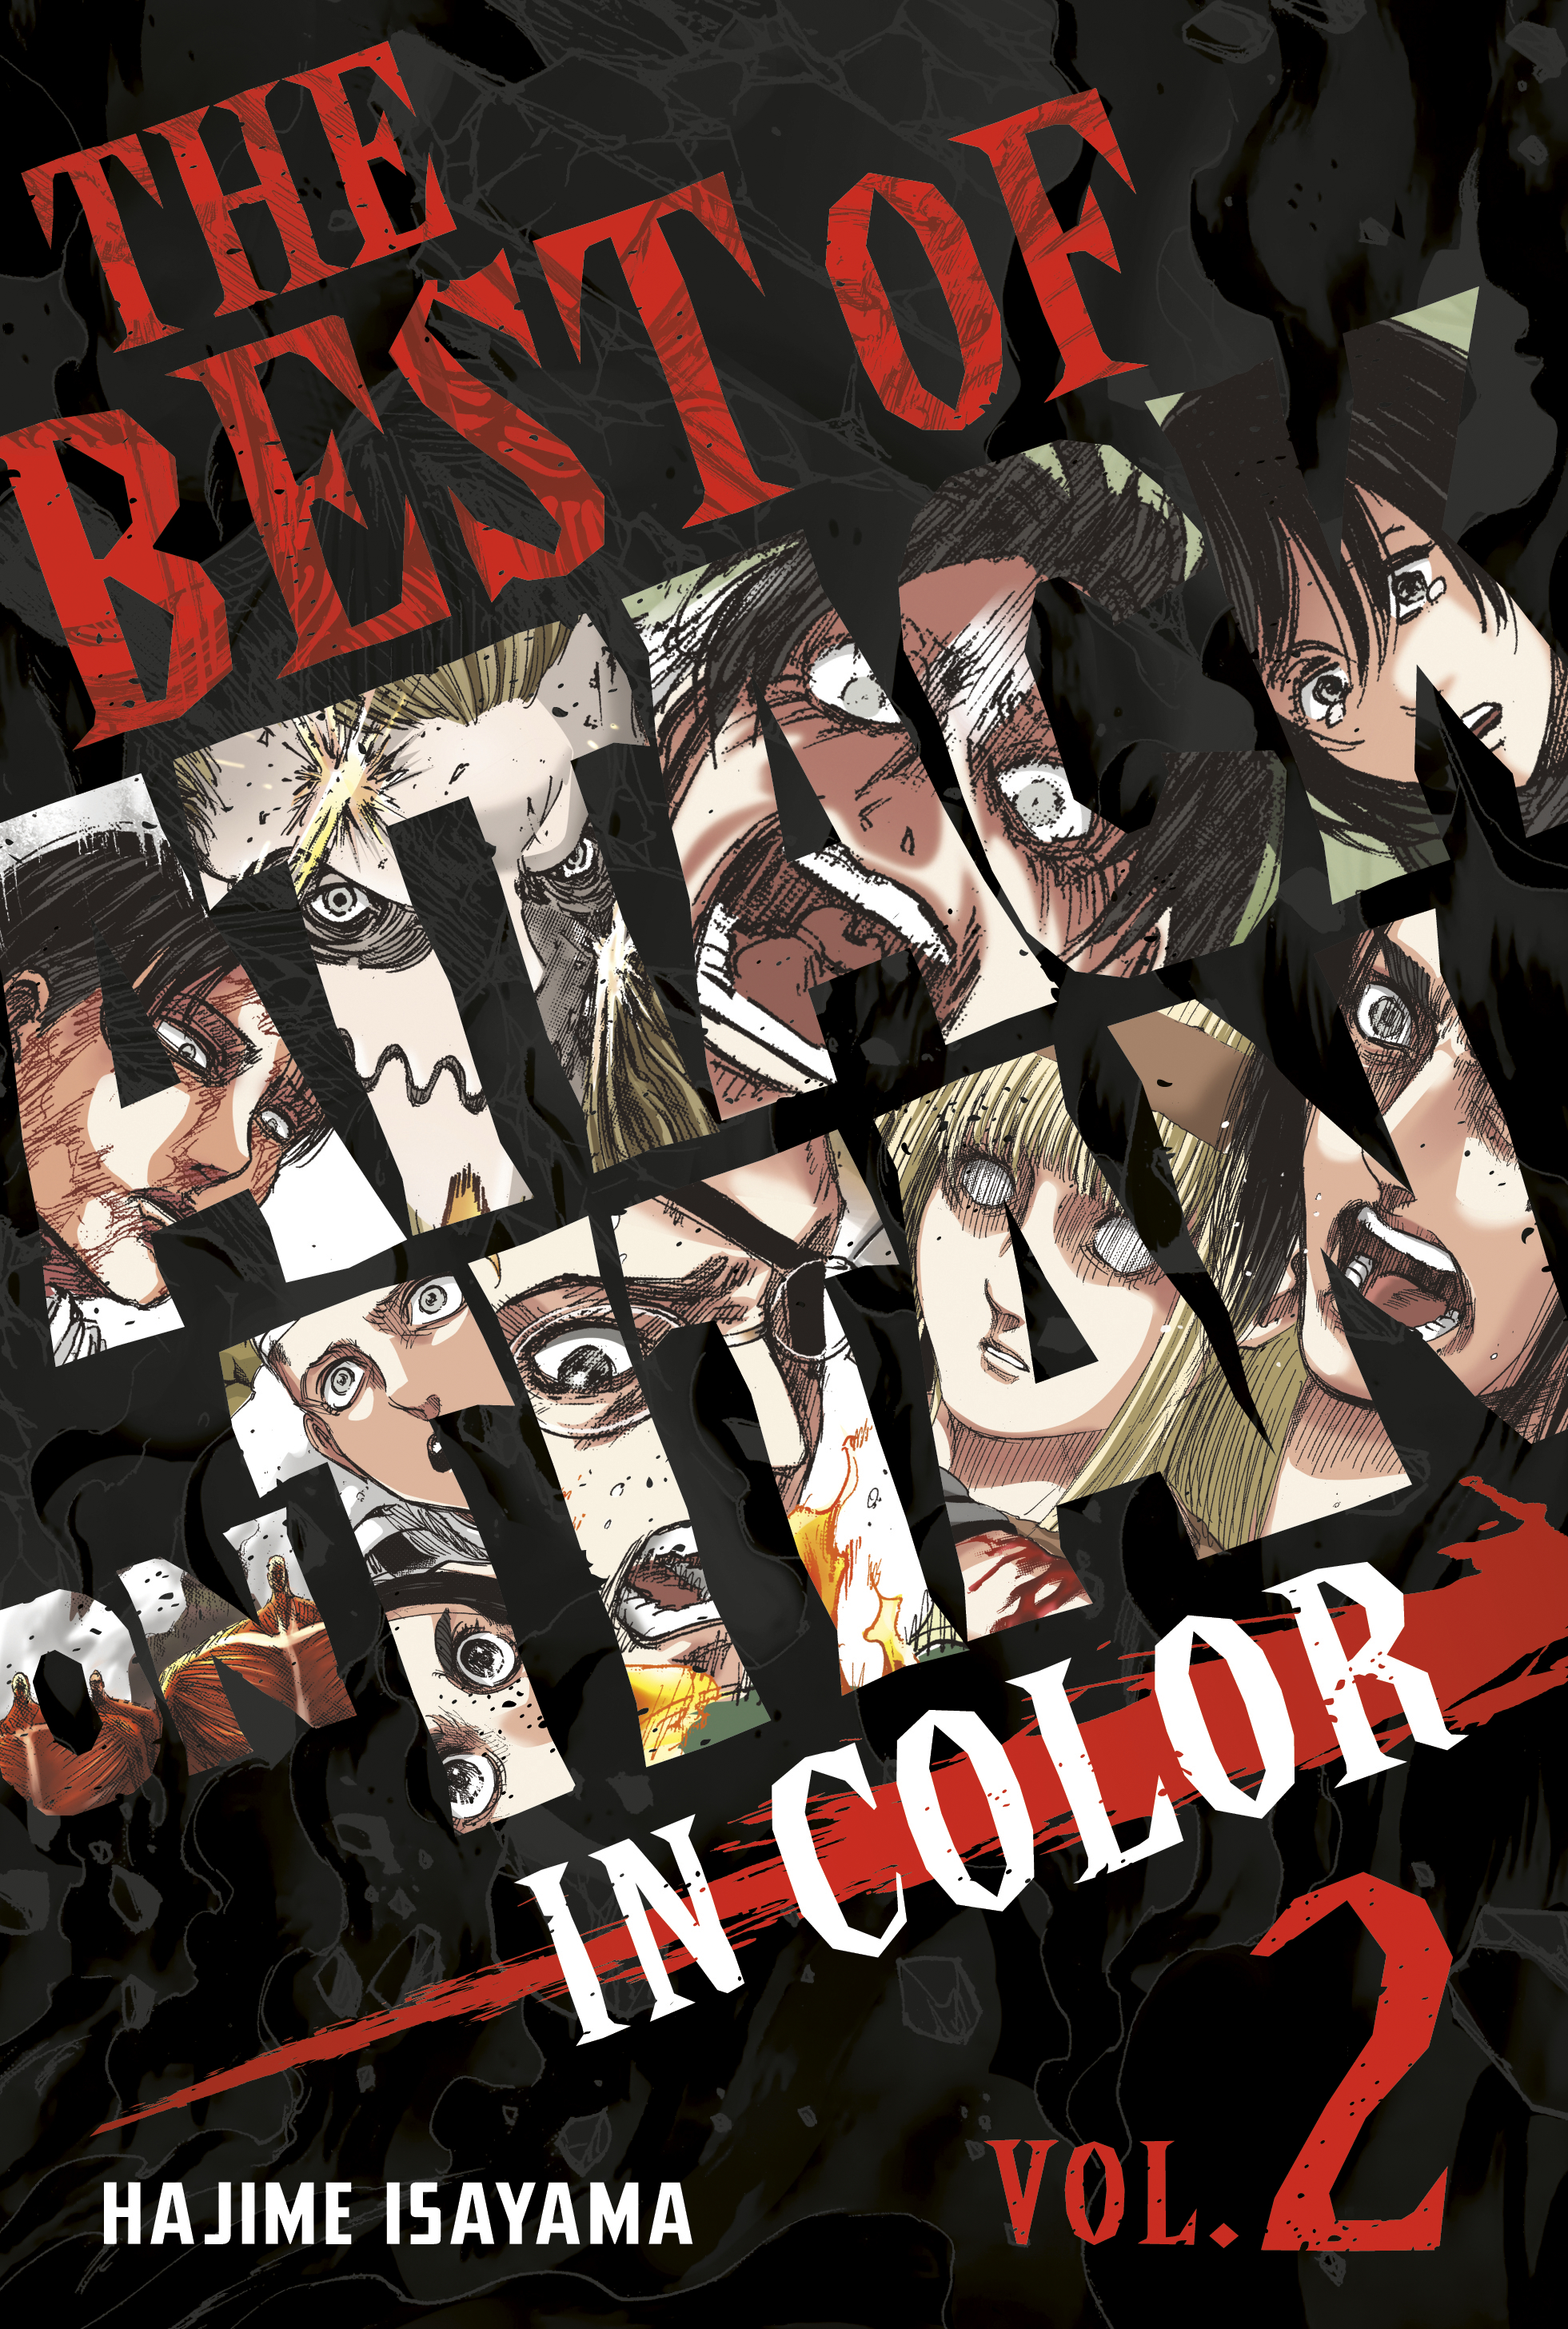 Best of Attack On Titan Color Hardcover Edition Volume 2 (Mature)